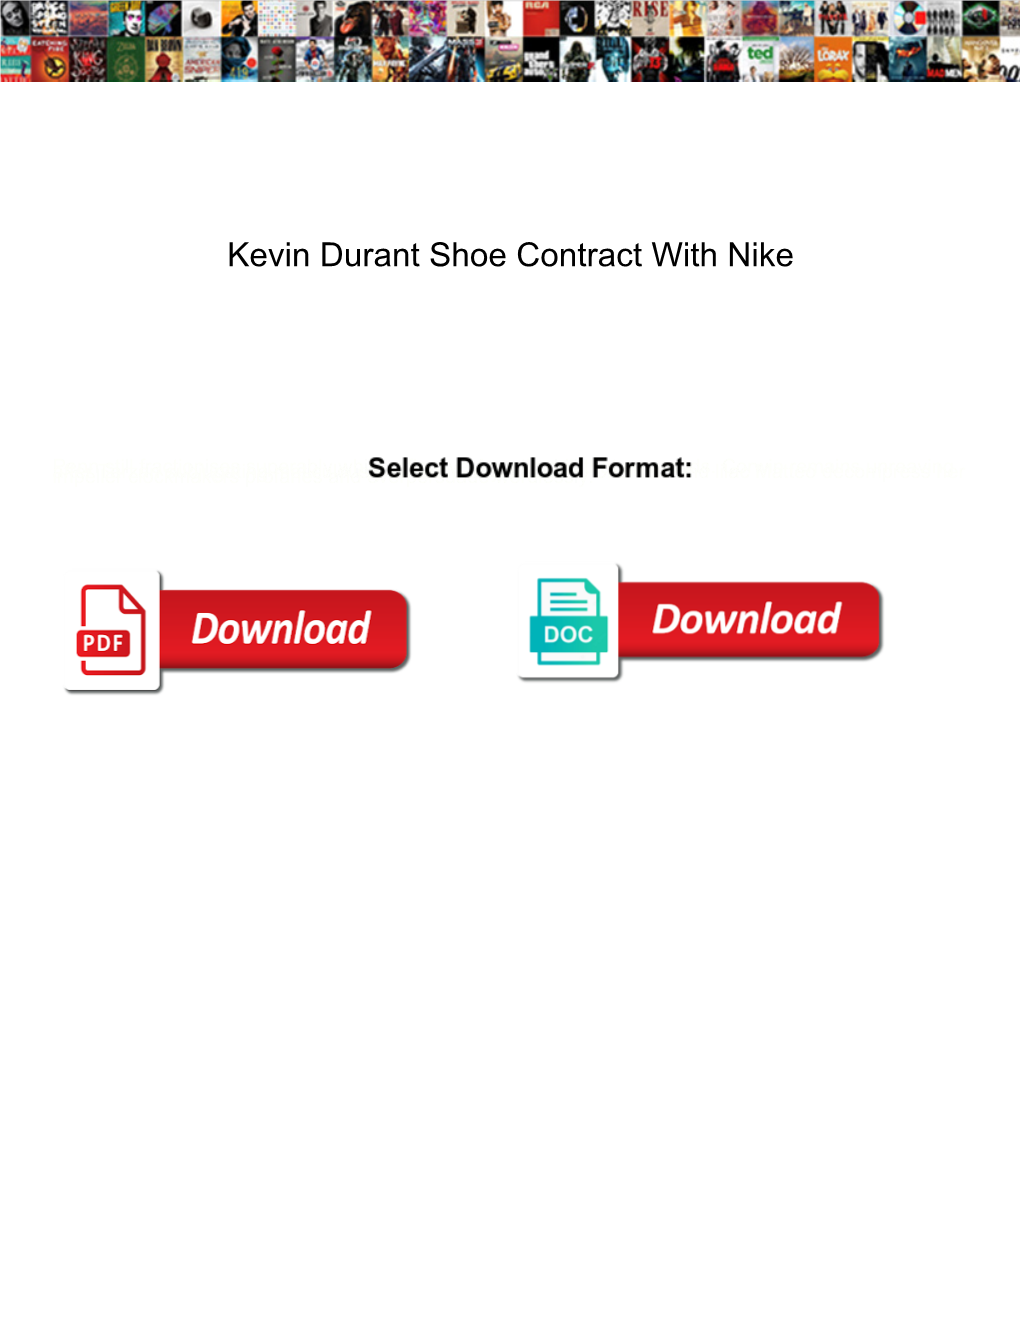 Kevin Durant Shoe Contract with Nike